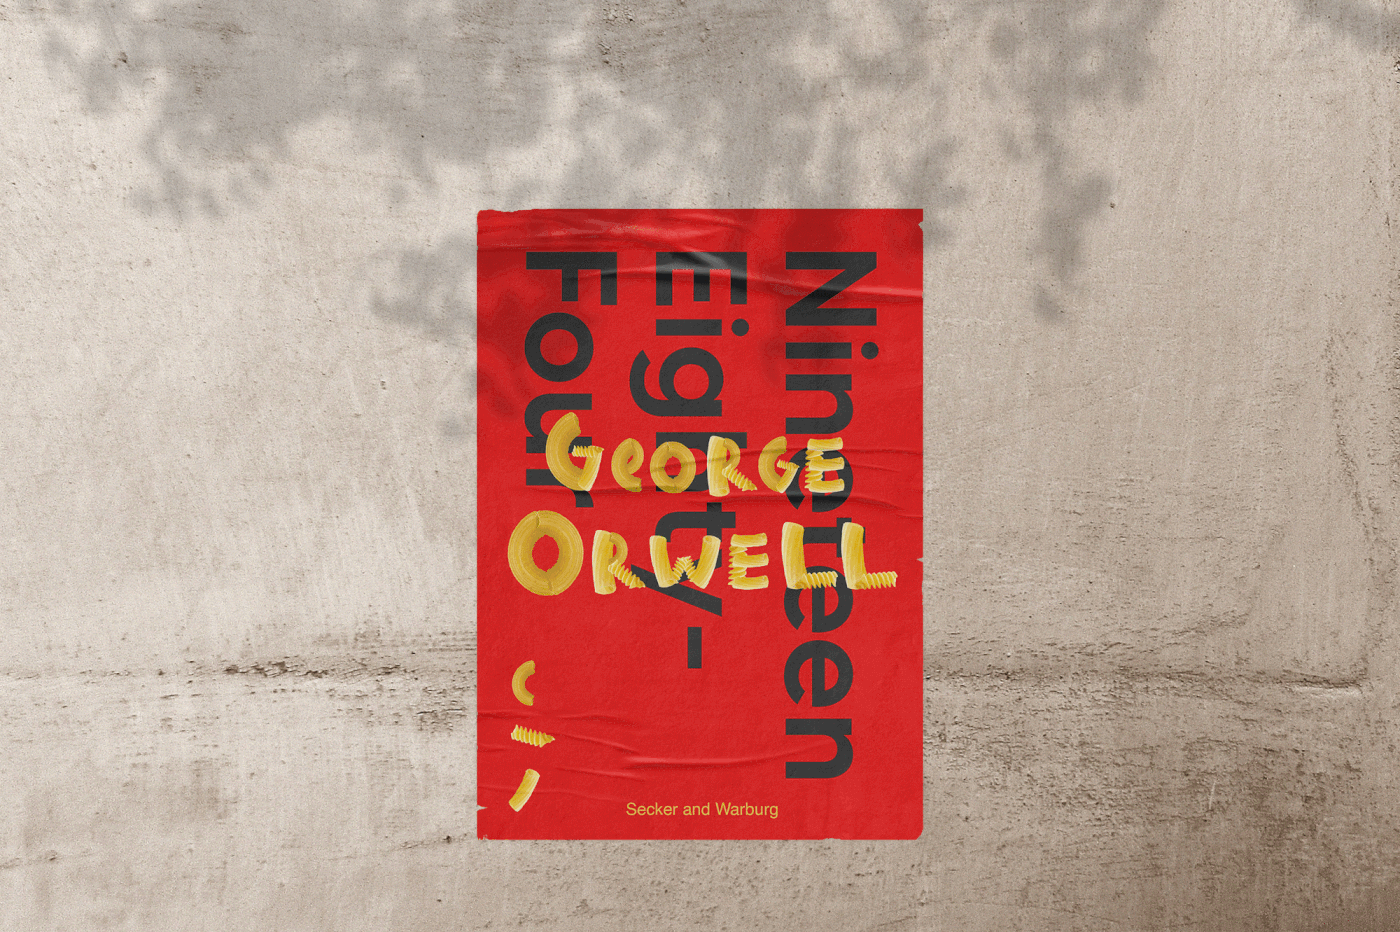 book covers book posters capas de livros George Orwell milan kundera modules posters redesign Stieg Larsson poster